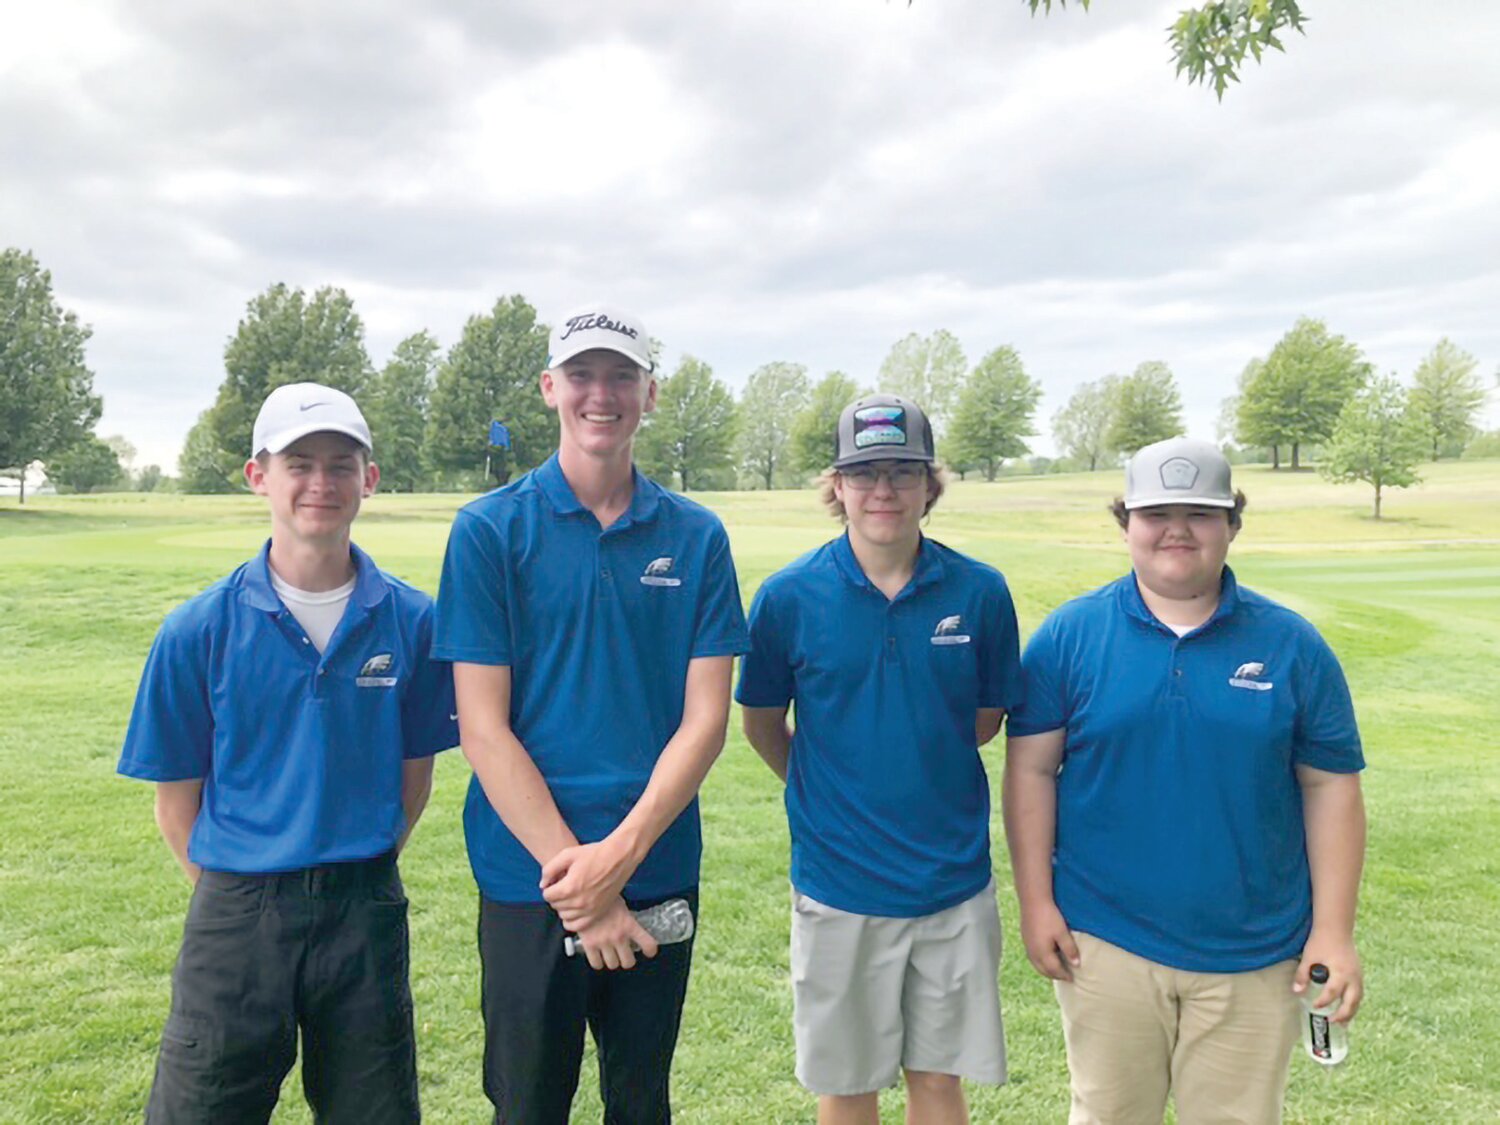 Hartville’s inaugural golf team competed in their first district match last week.